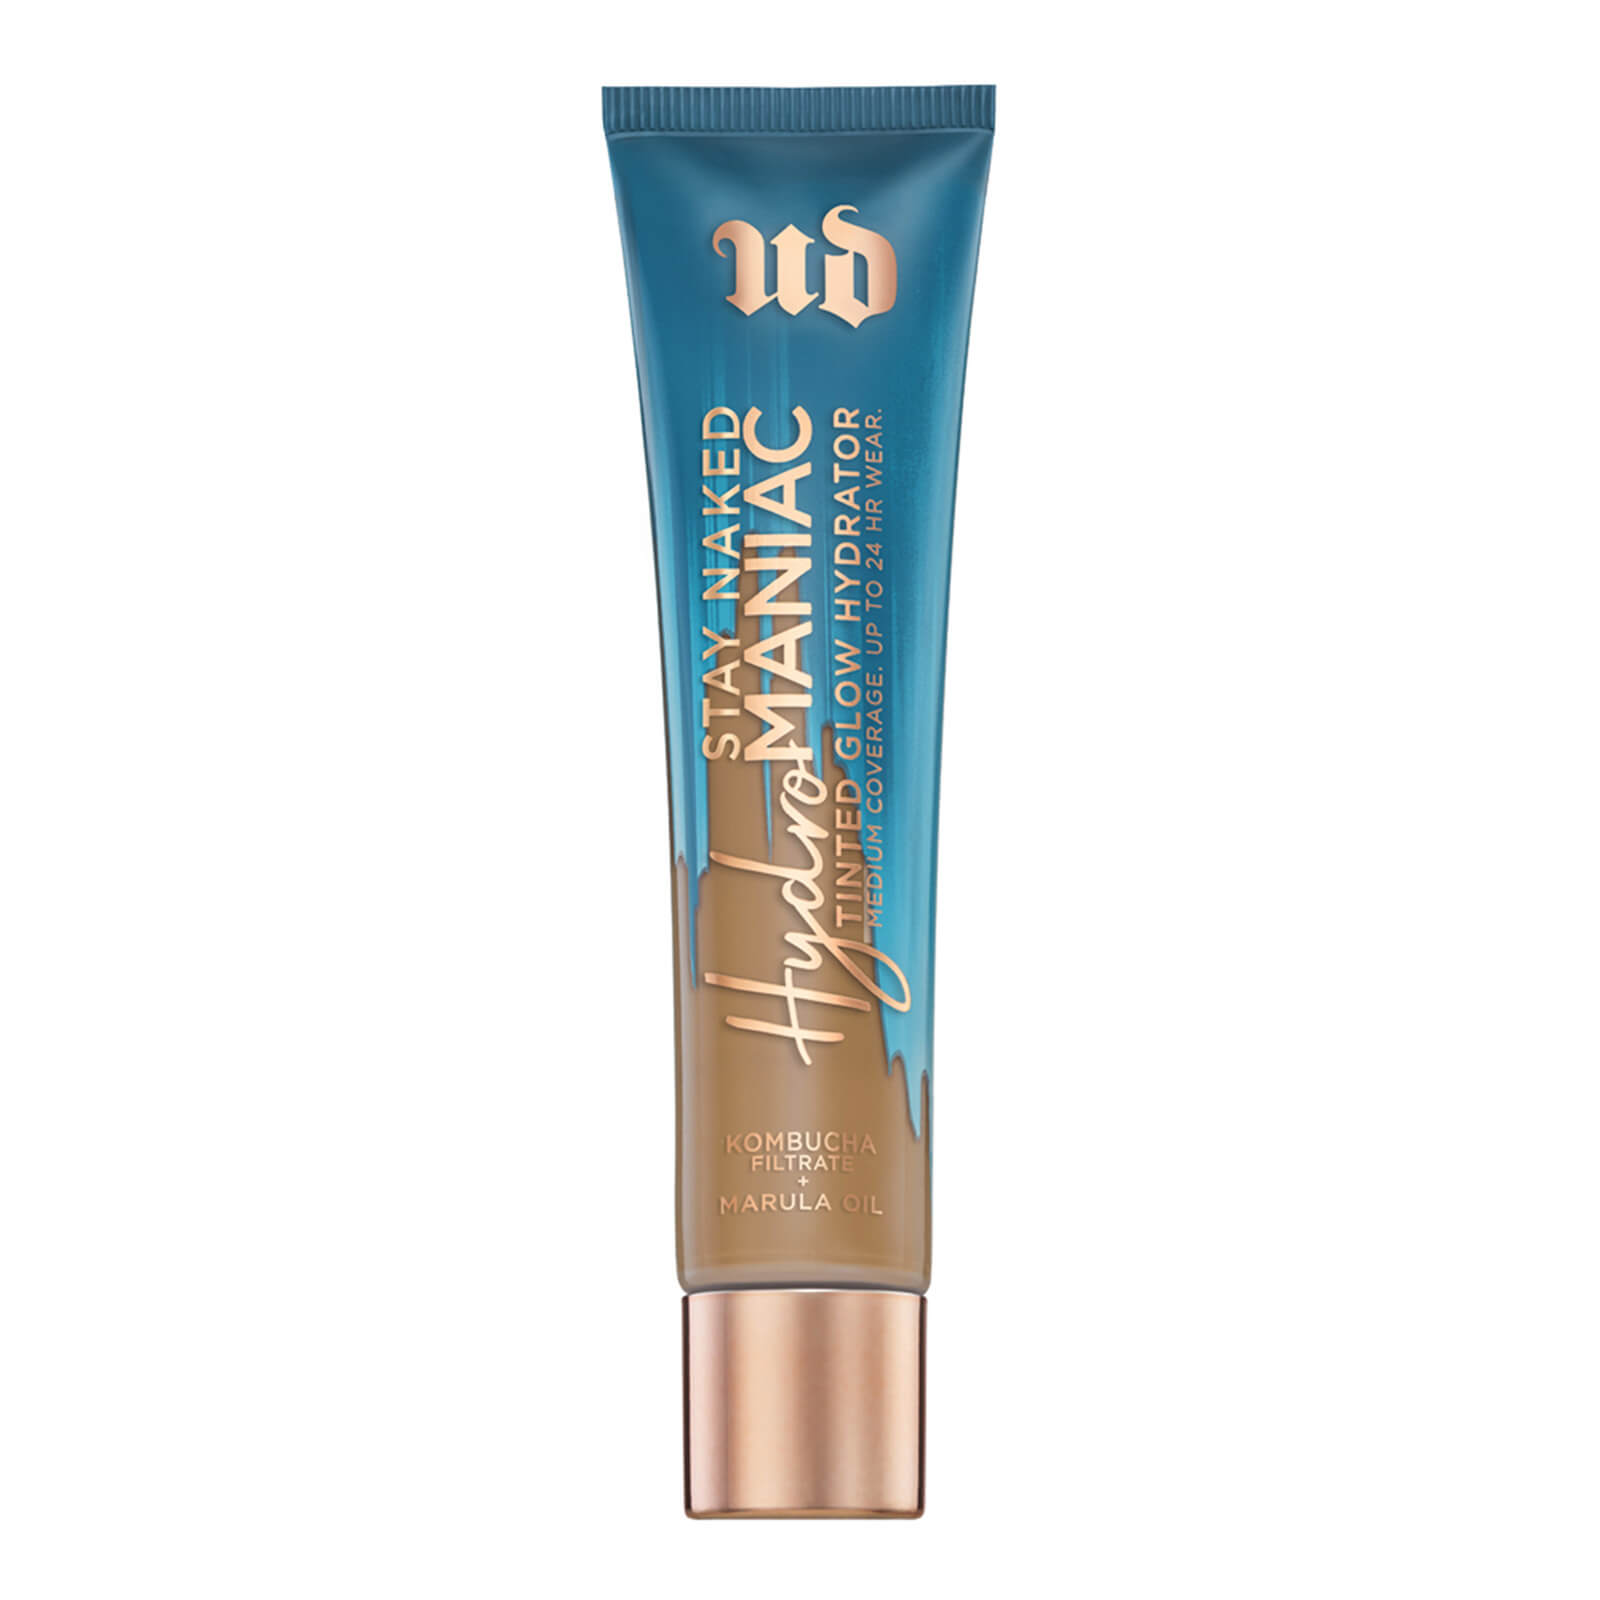 Image of Urban Decay Stay Naked Hydromaniac Tinted Glow Hydrator 35ml (Various Shades) - 60